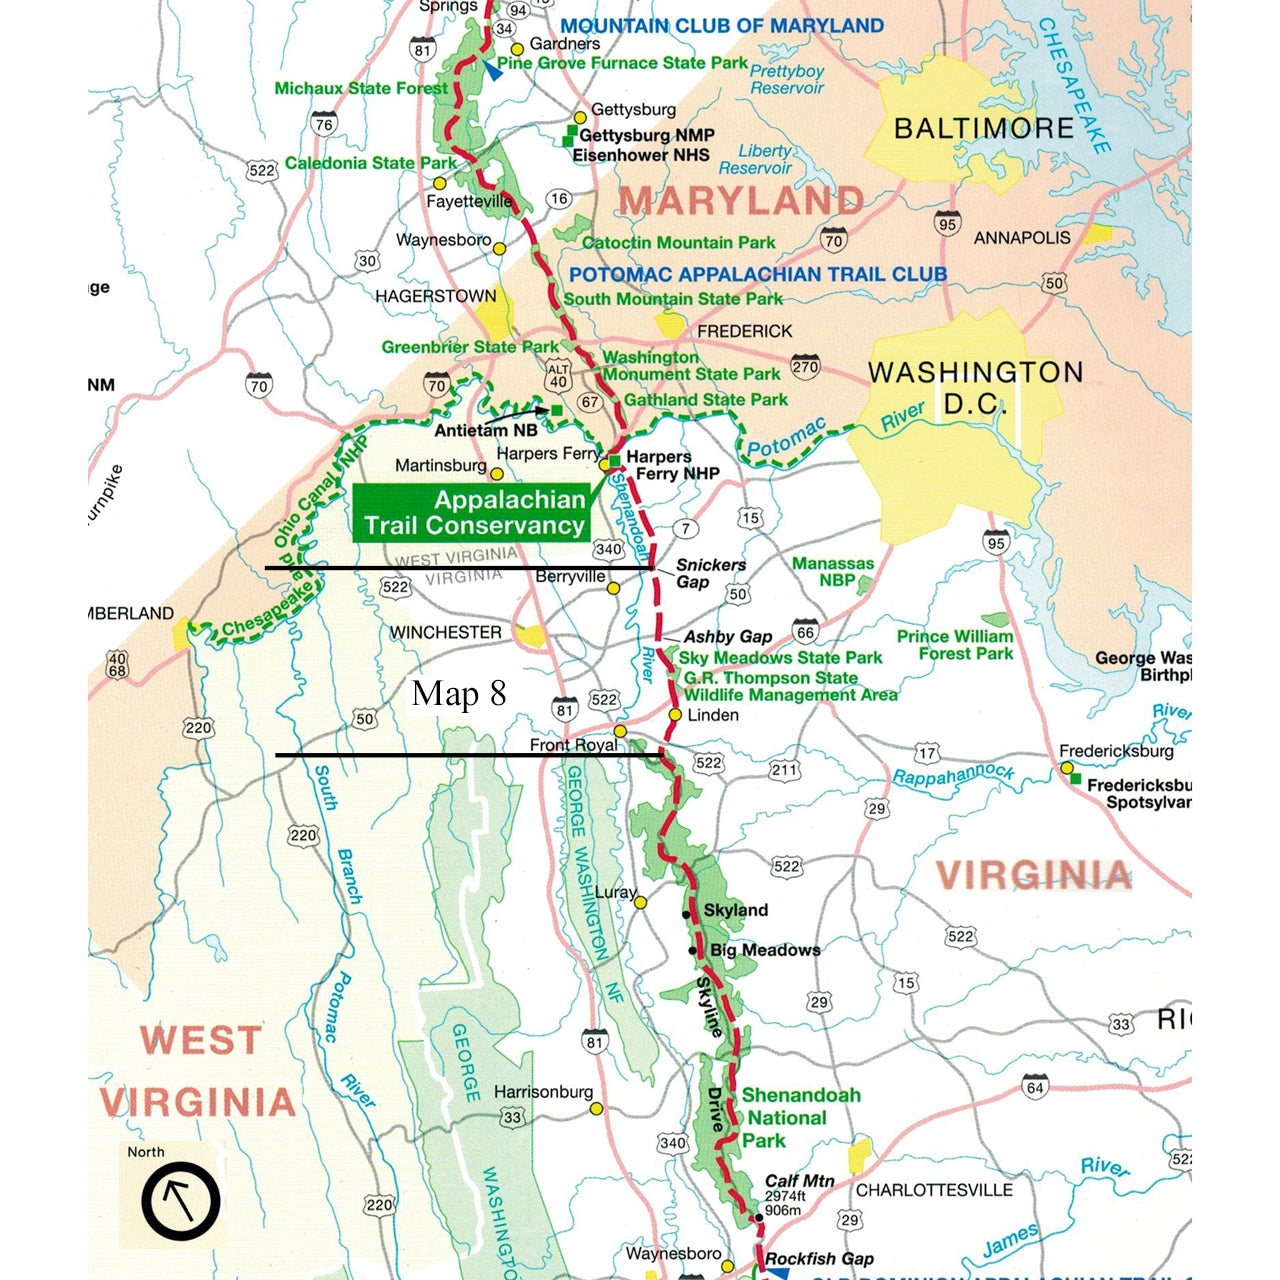 Appalachian Trail Conservancy AT Map: Northern Virginia - South